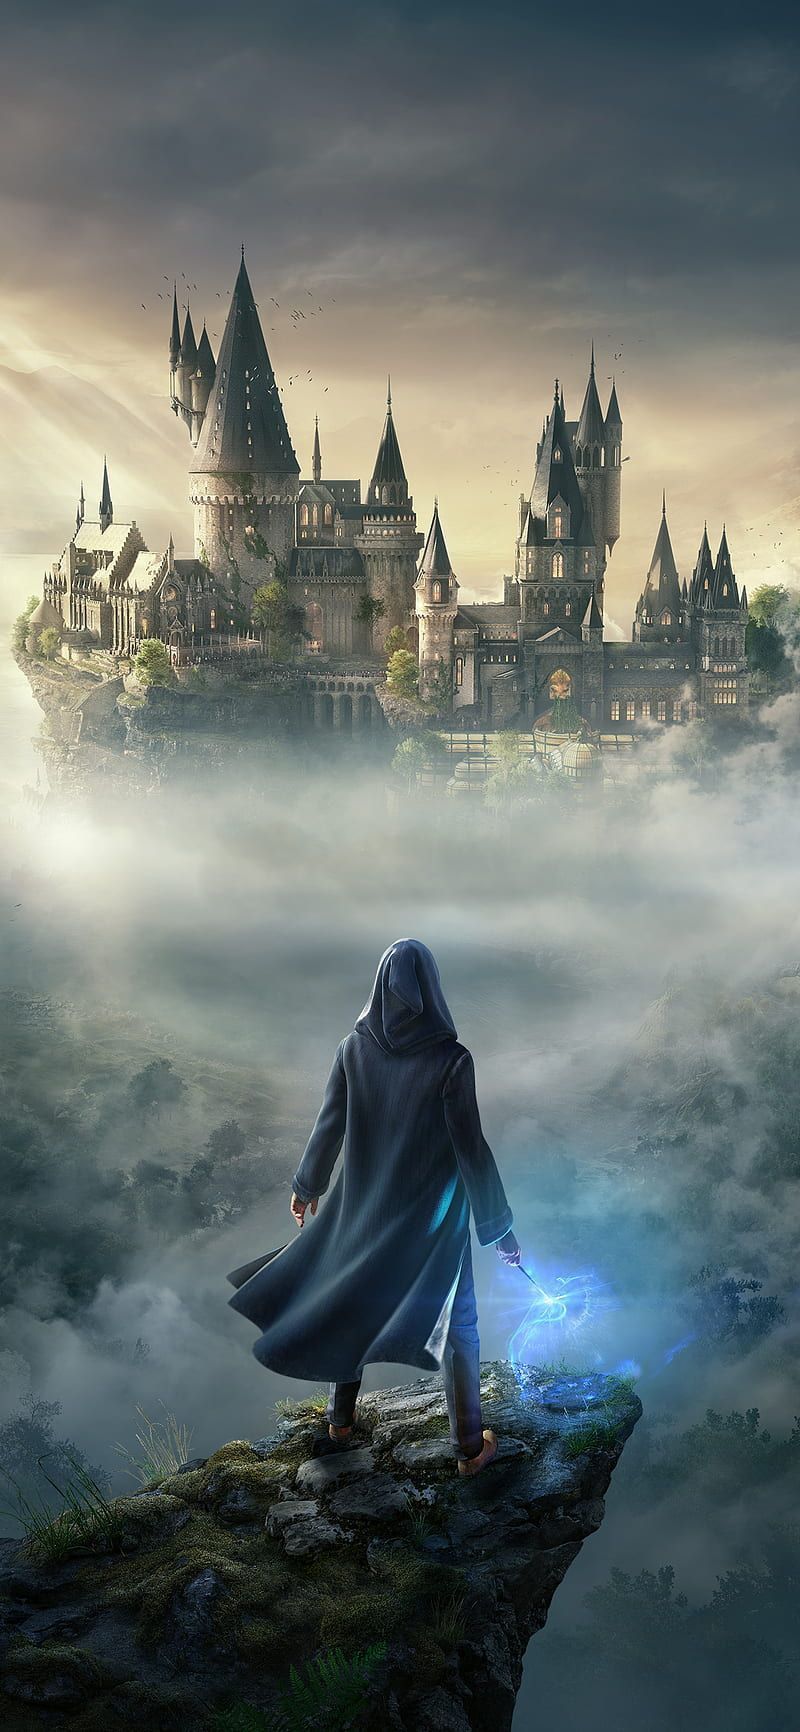 Harry Potter standing on a cliff with Hogwarts in the background - Hogwarts